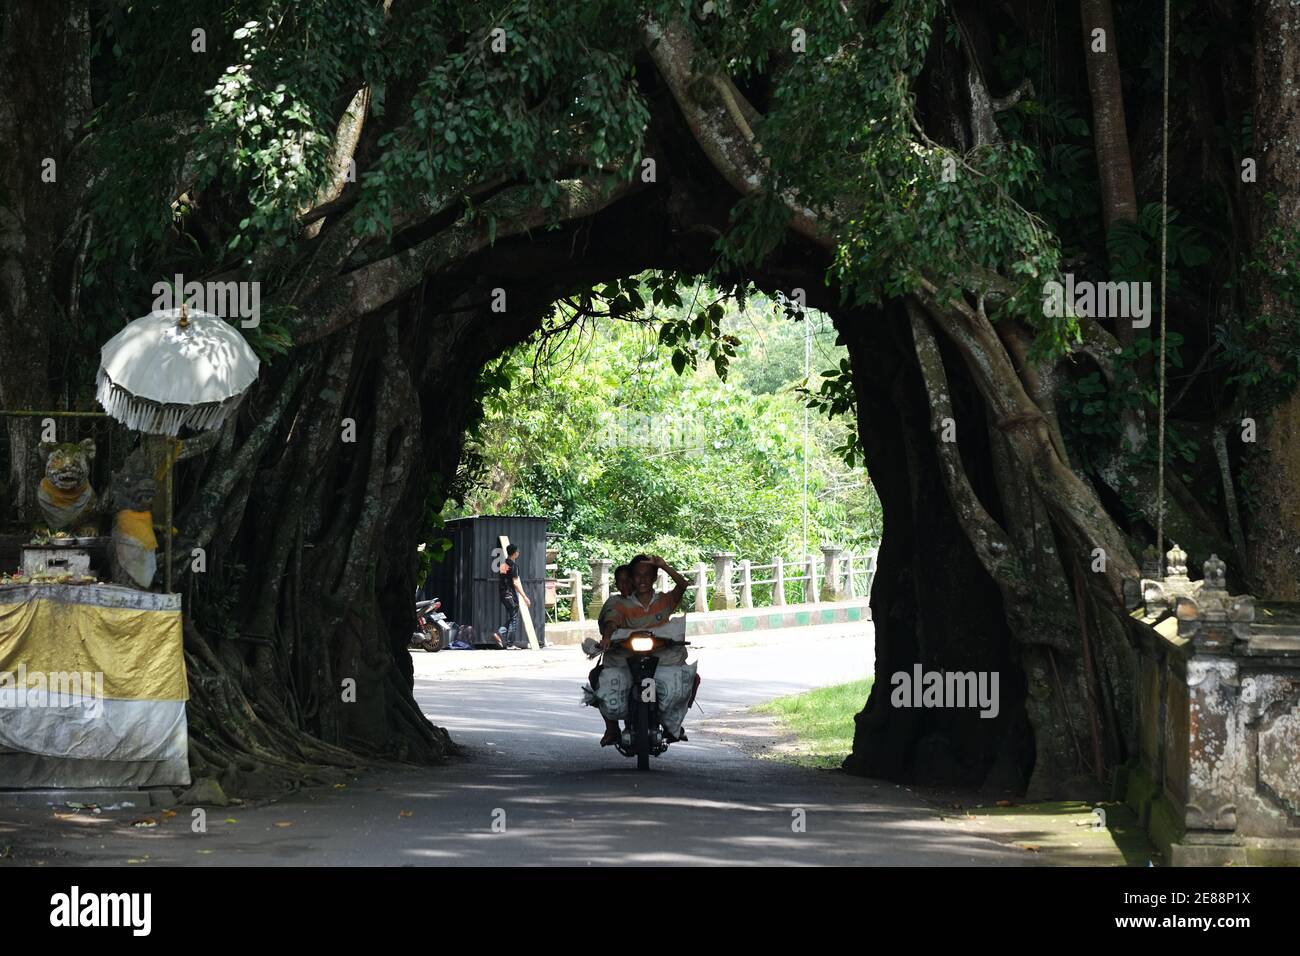 Indonesia Bali - Bunut Bolong - Old banyan tree with a road tunnel Stock Photo